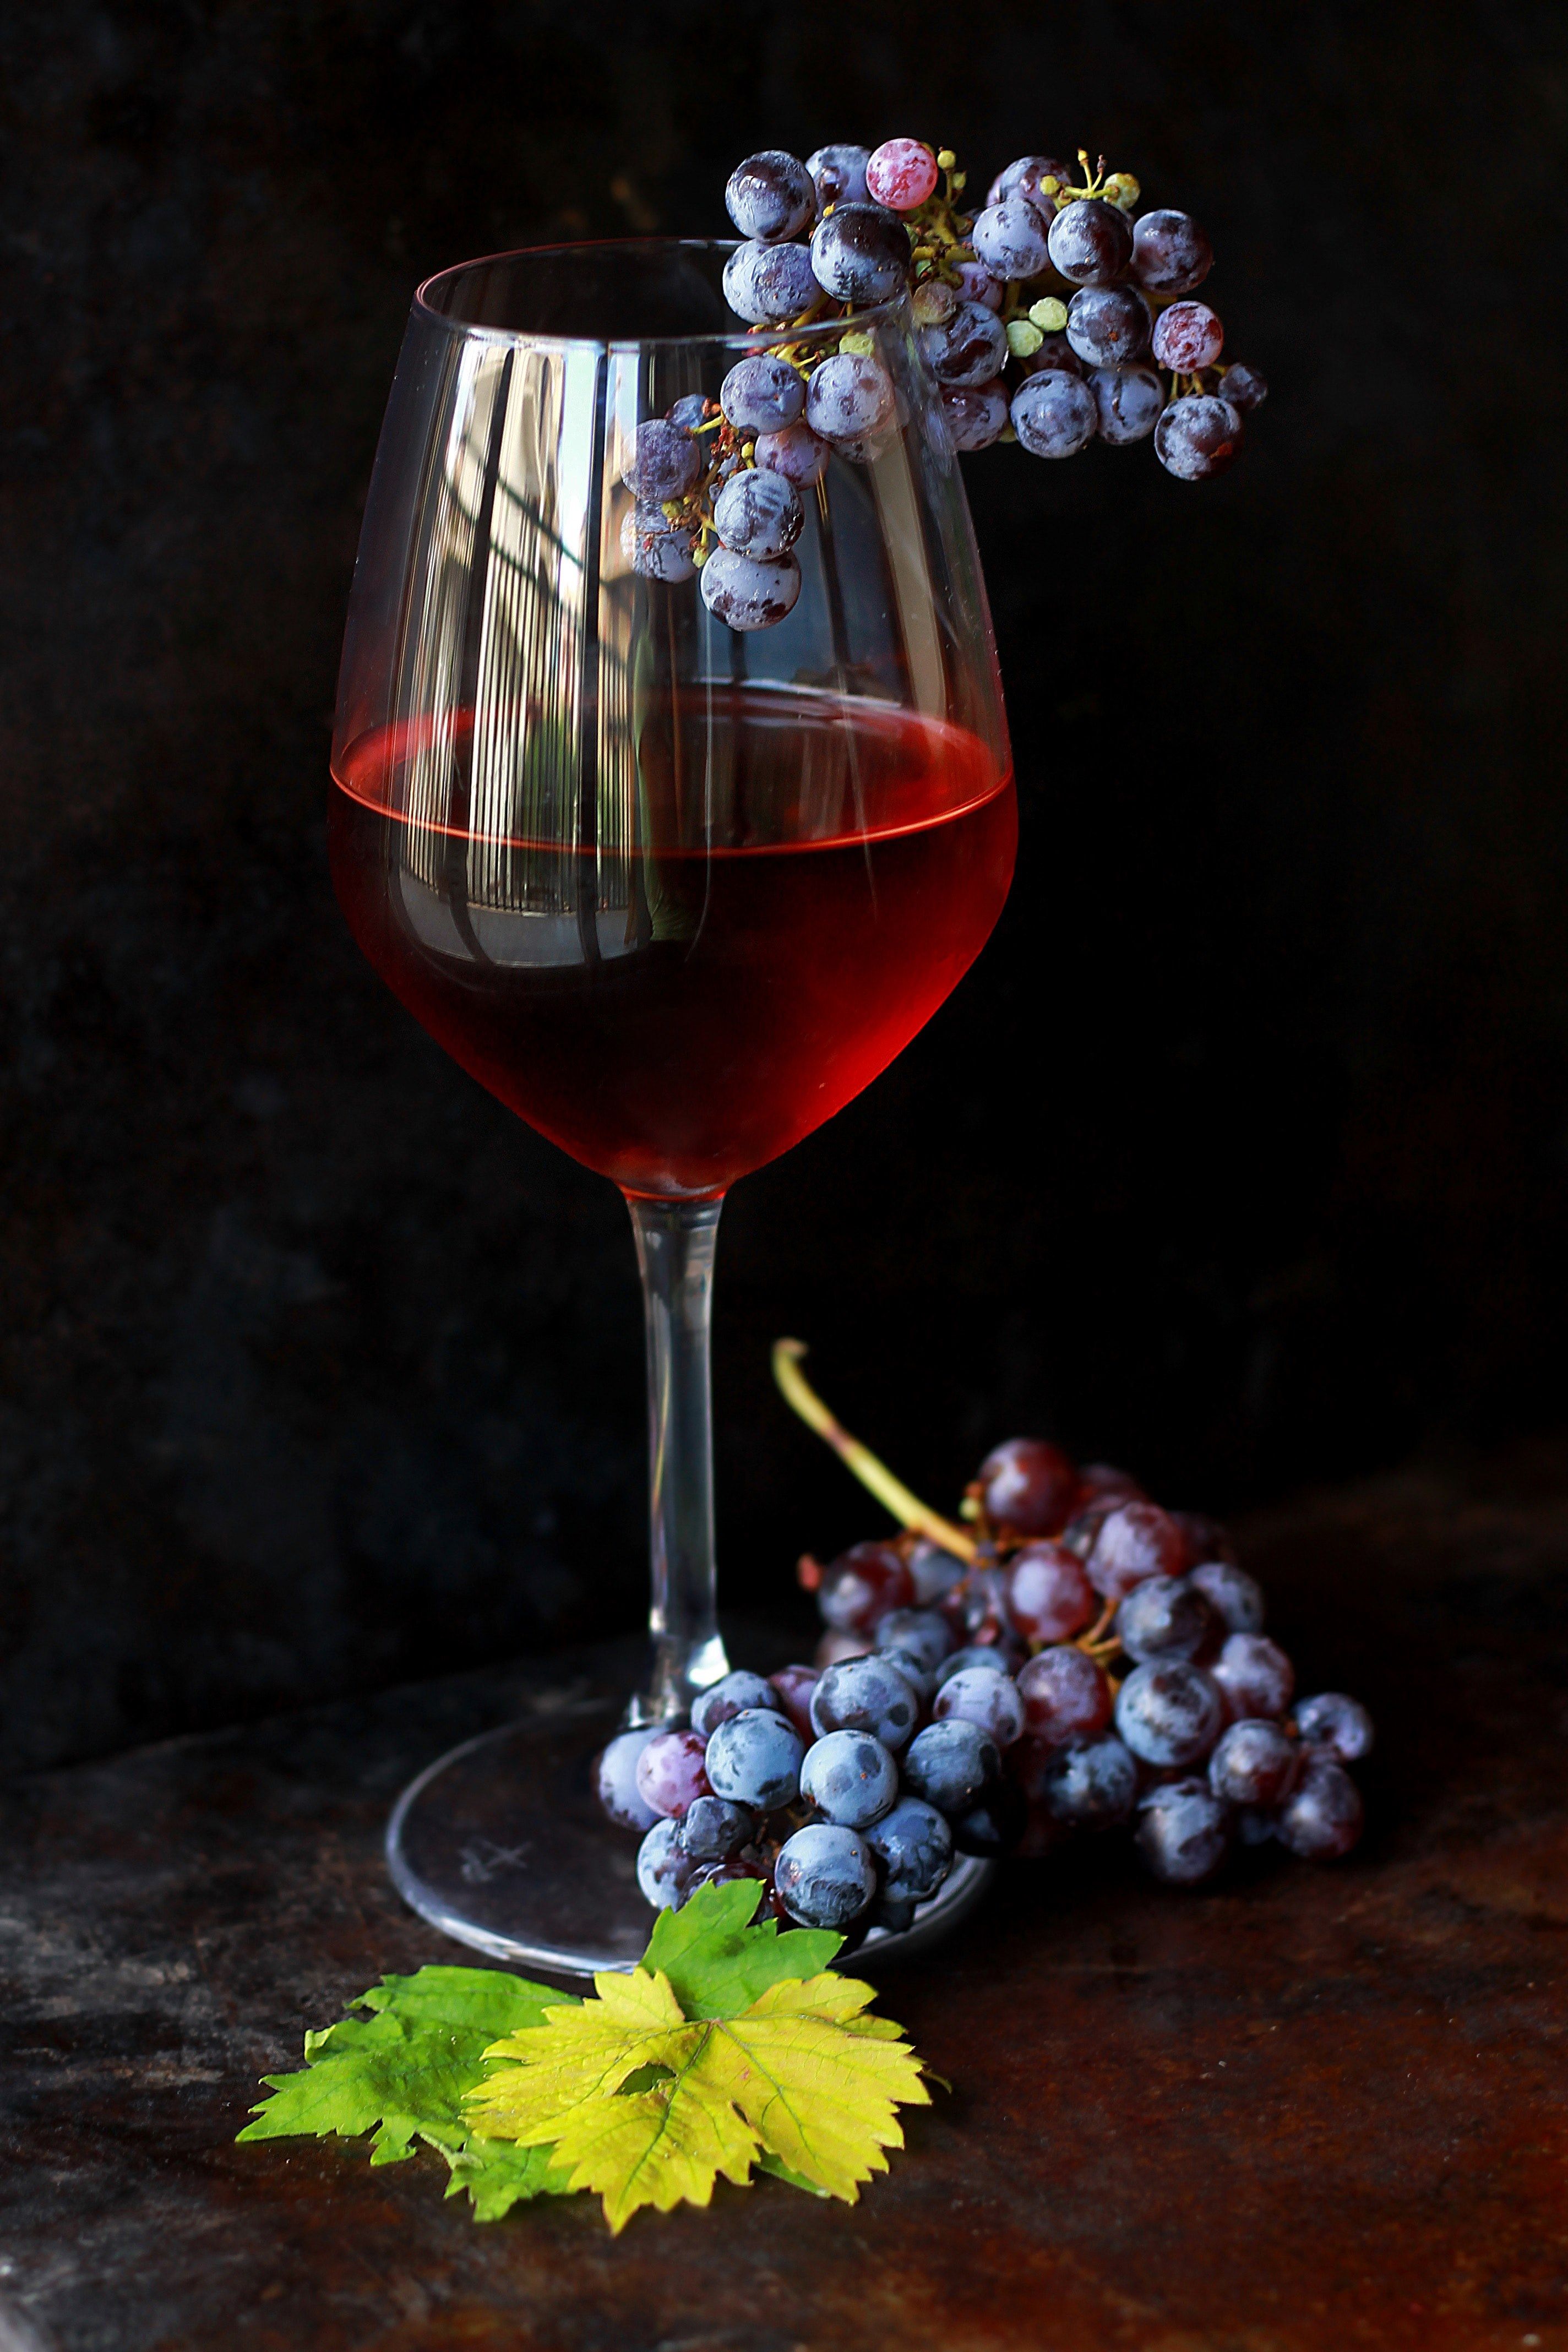 wine glass and wine HD wallpaper and background